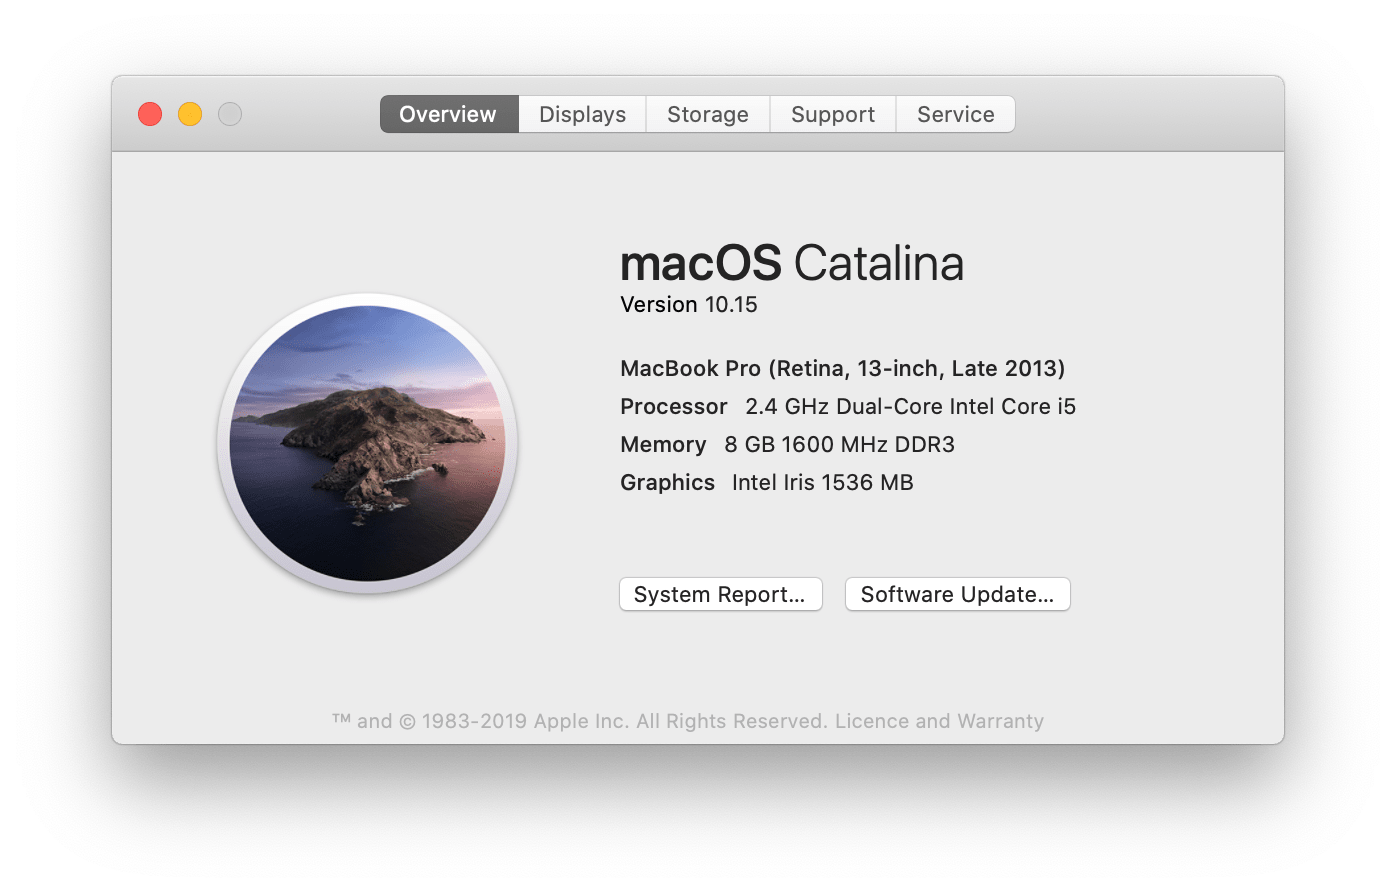 macOS Catalina 10.15 overview